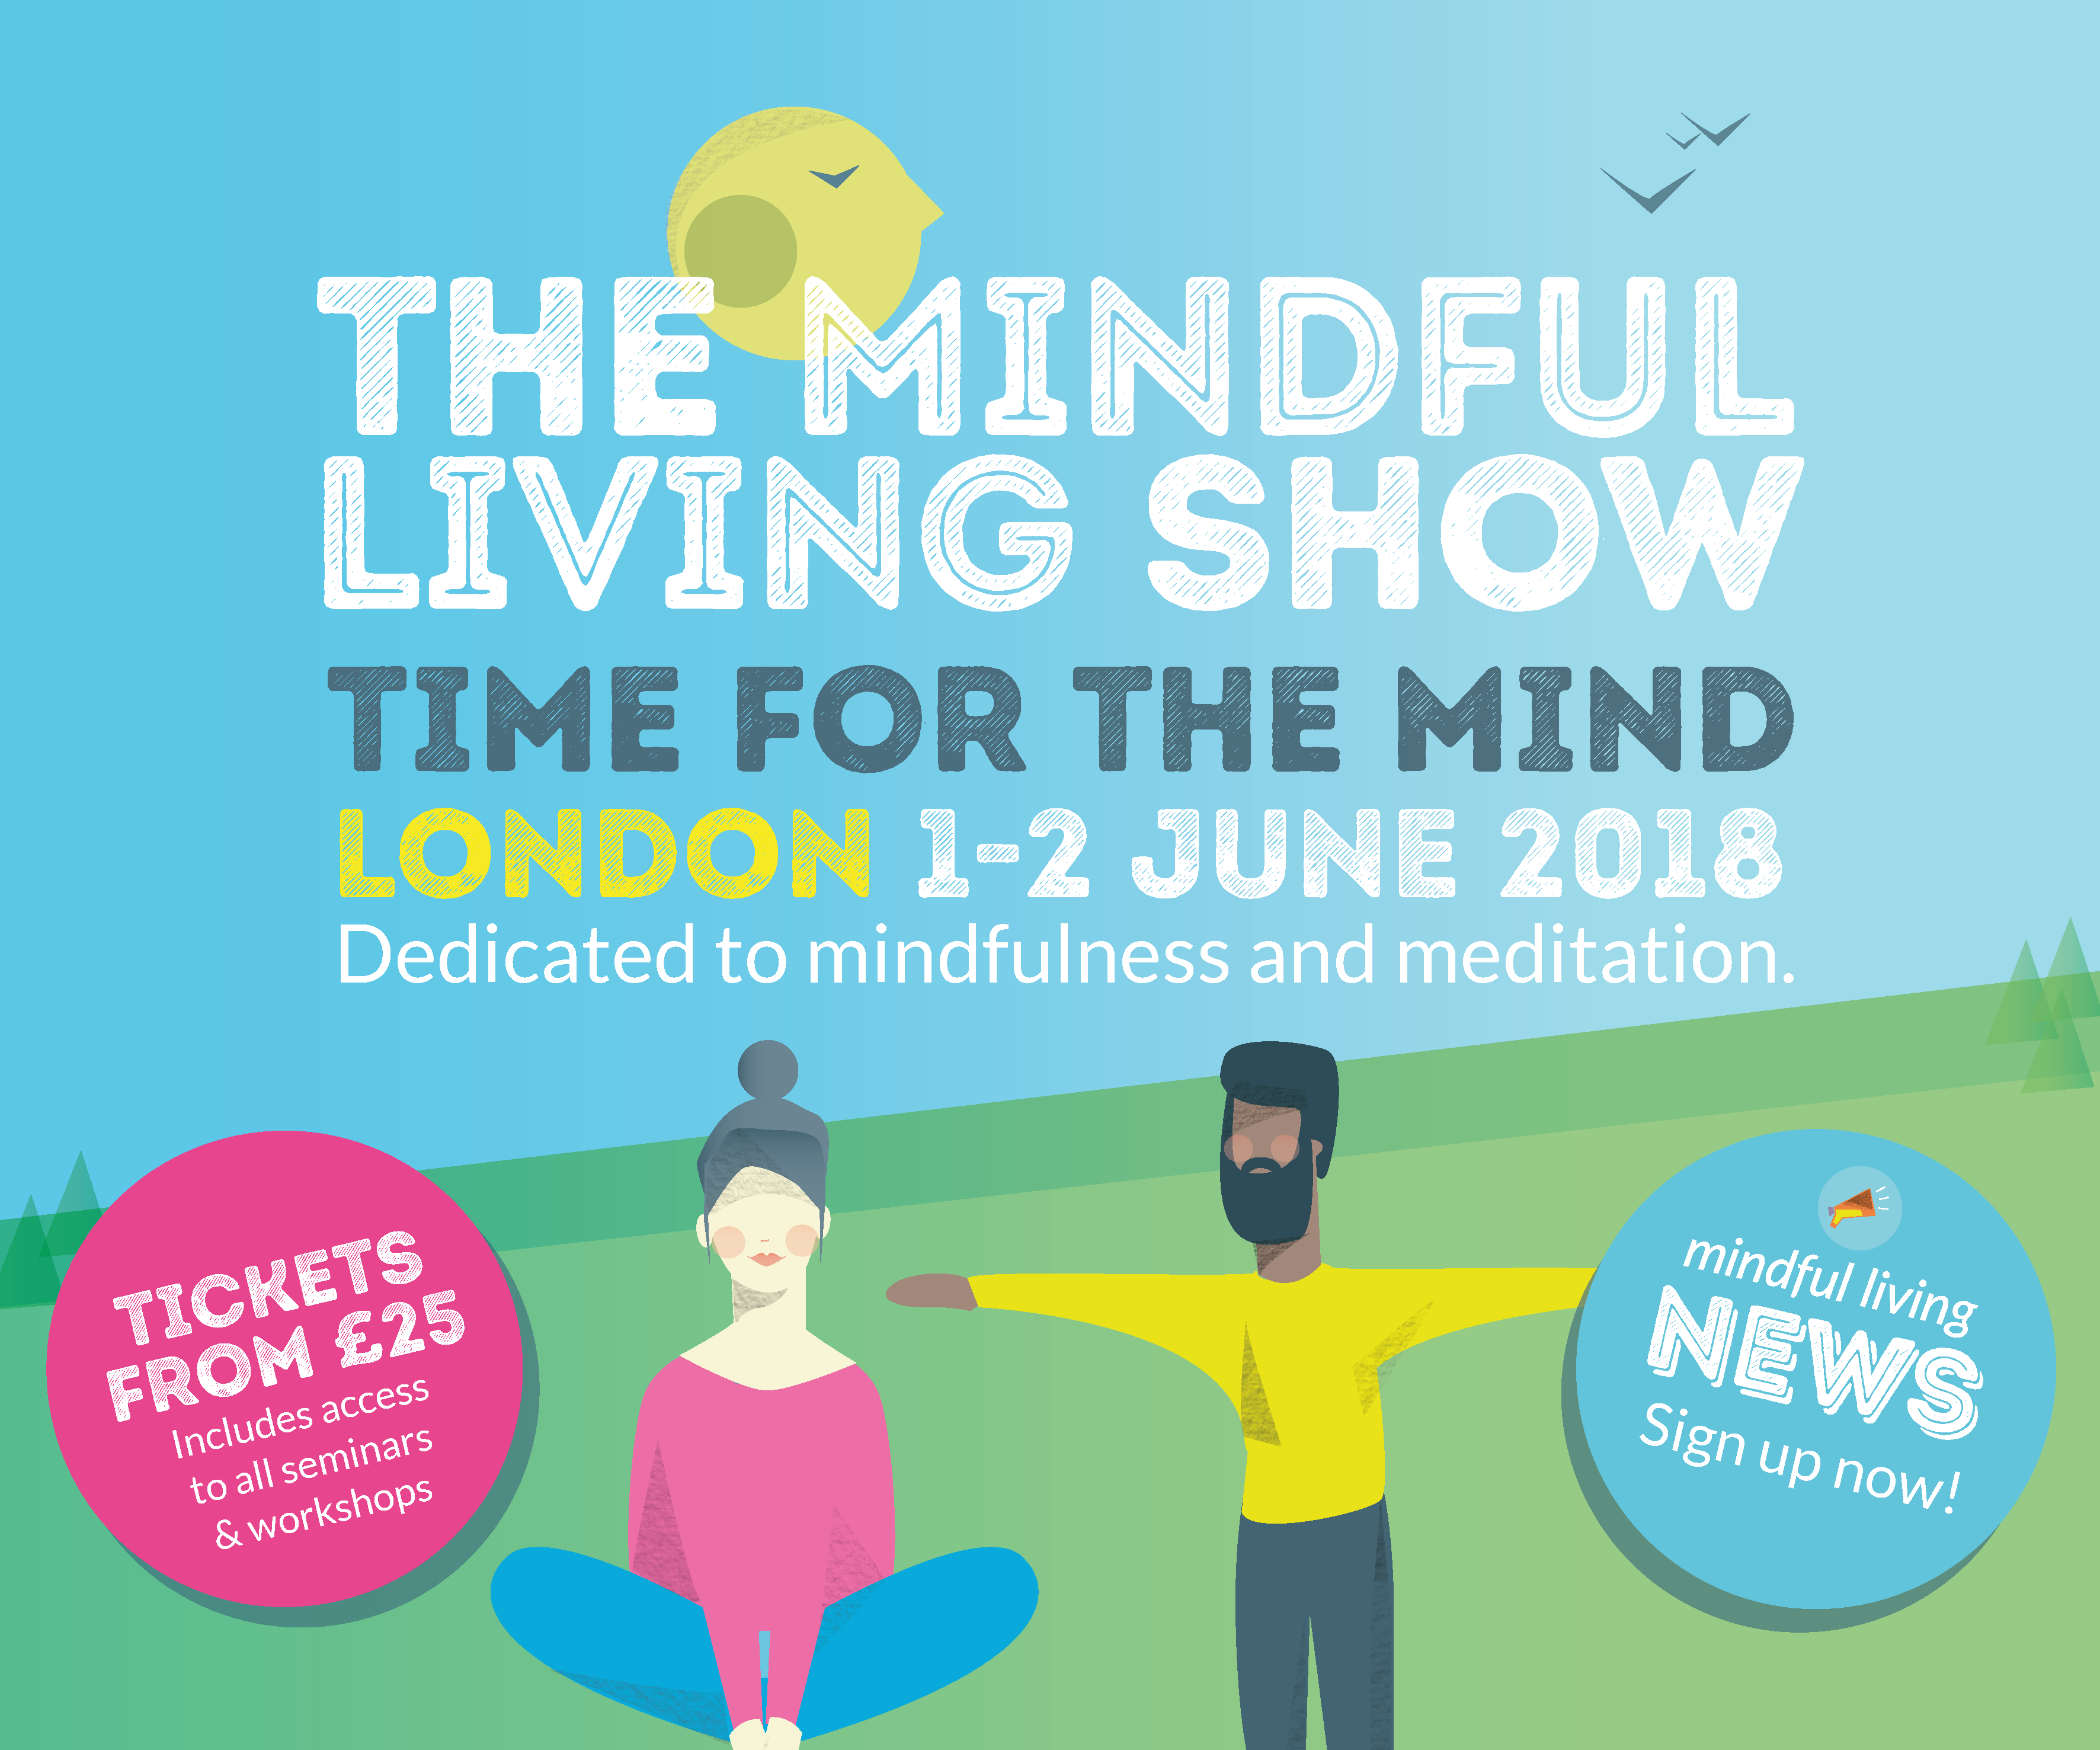 Come to the Mindful Living Show in London in June